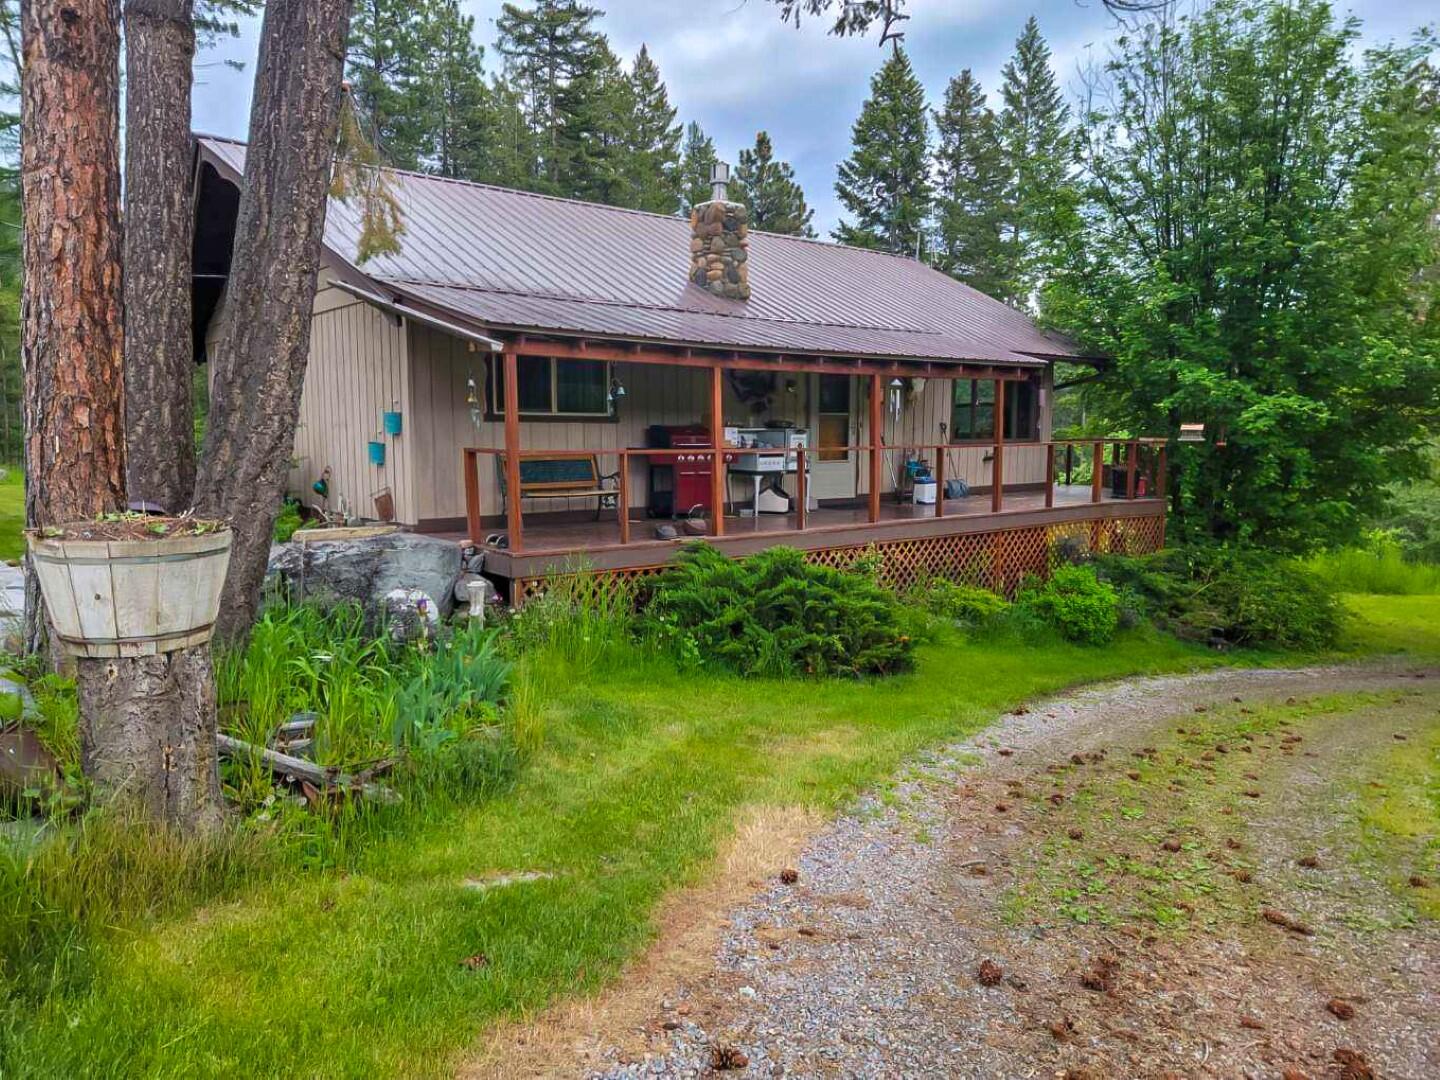 2-home property, Primary residence is a 2030sf 3/2, the daylight basement has a separate entry, a vault room & has many updates. Guest home was constructed 2019 & is a 1300sf 3/2 on a poured foundation & its own septic system. Home has solid core doors, rock fireplace & many other upgrades. The property includes a 32x40 heated shop w/22x40 lean-to, a 24x30 carport & 100' of commercial highway frontage. Guest home recently rented for 6 months over the winter @$3000 per month. Property is perfect for an investor to net multiple streams of income or a growing family. A manicured 5-acre forest is full of wildlife & offers privacy & great views from the deck as you enjoy your morning coffee. Call Dave Wood at 406-314-5858, or your real estate professional.